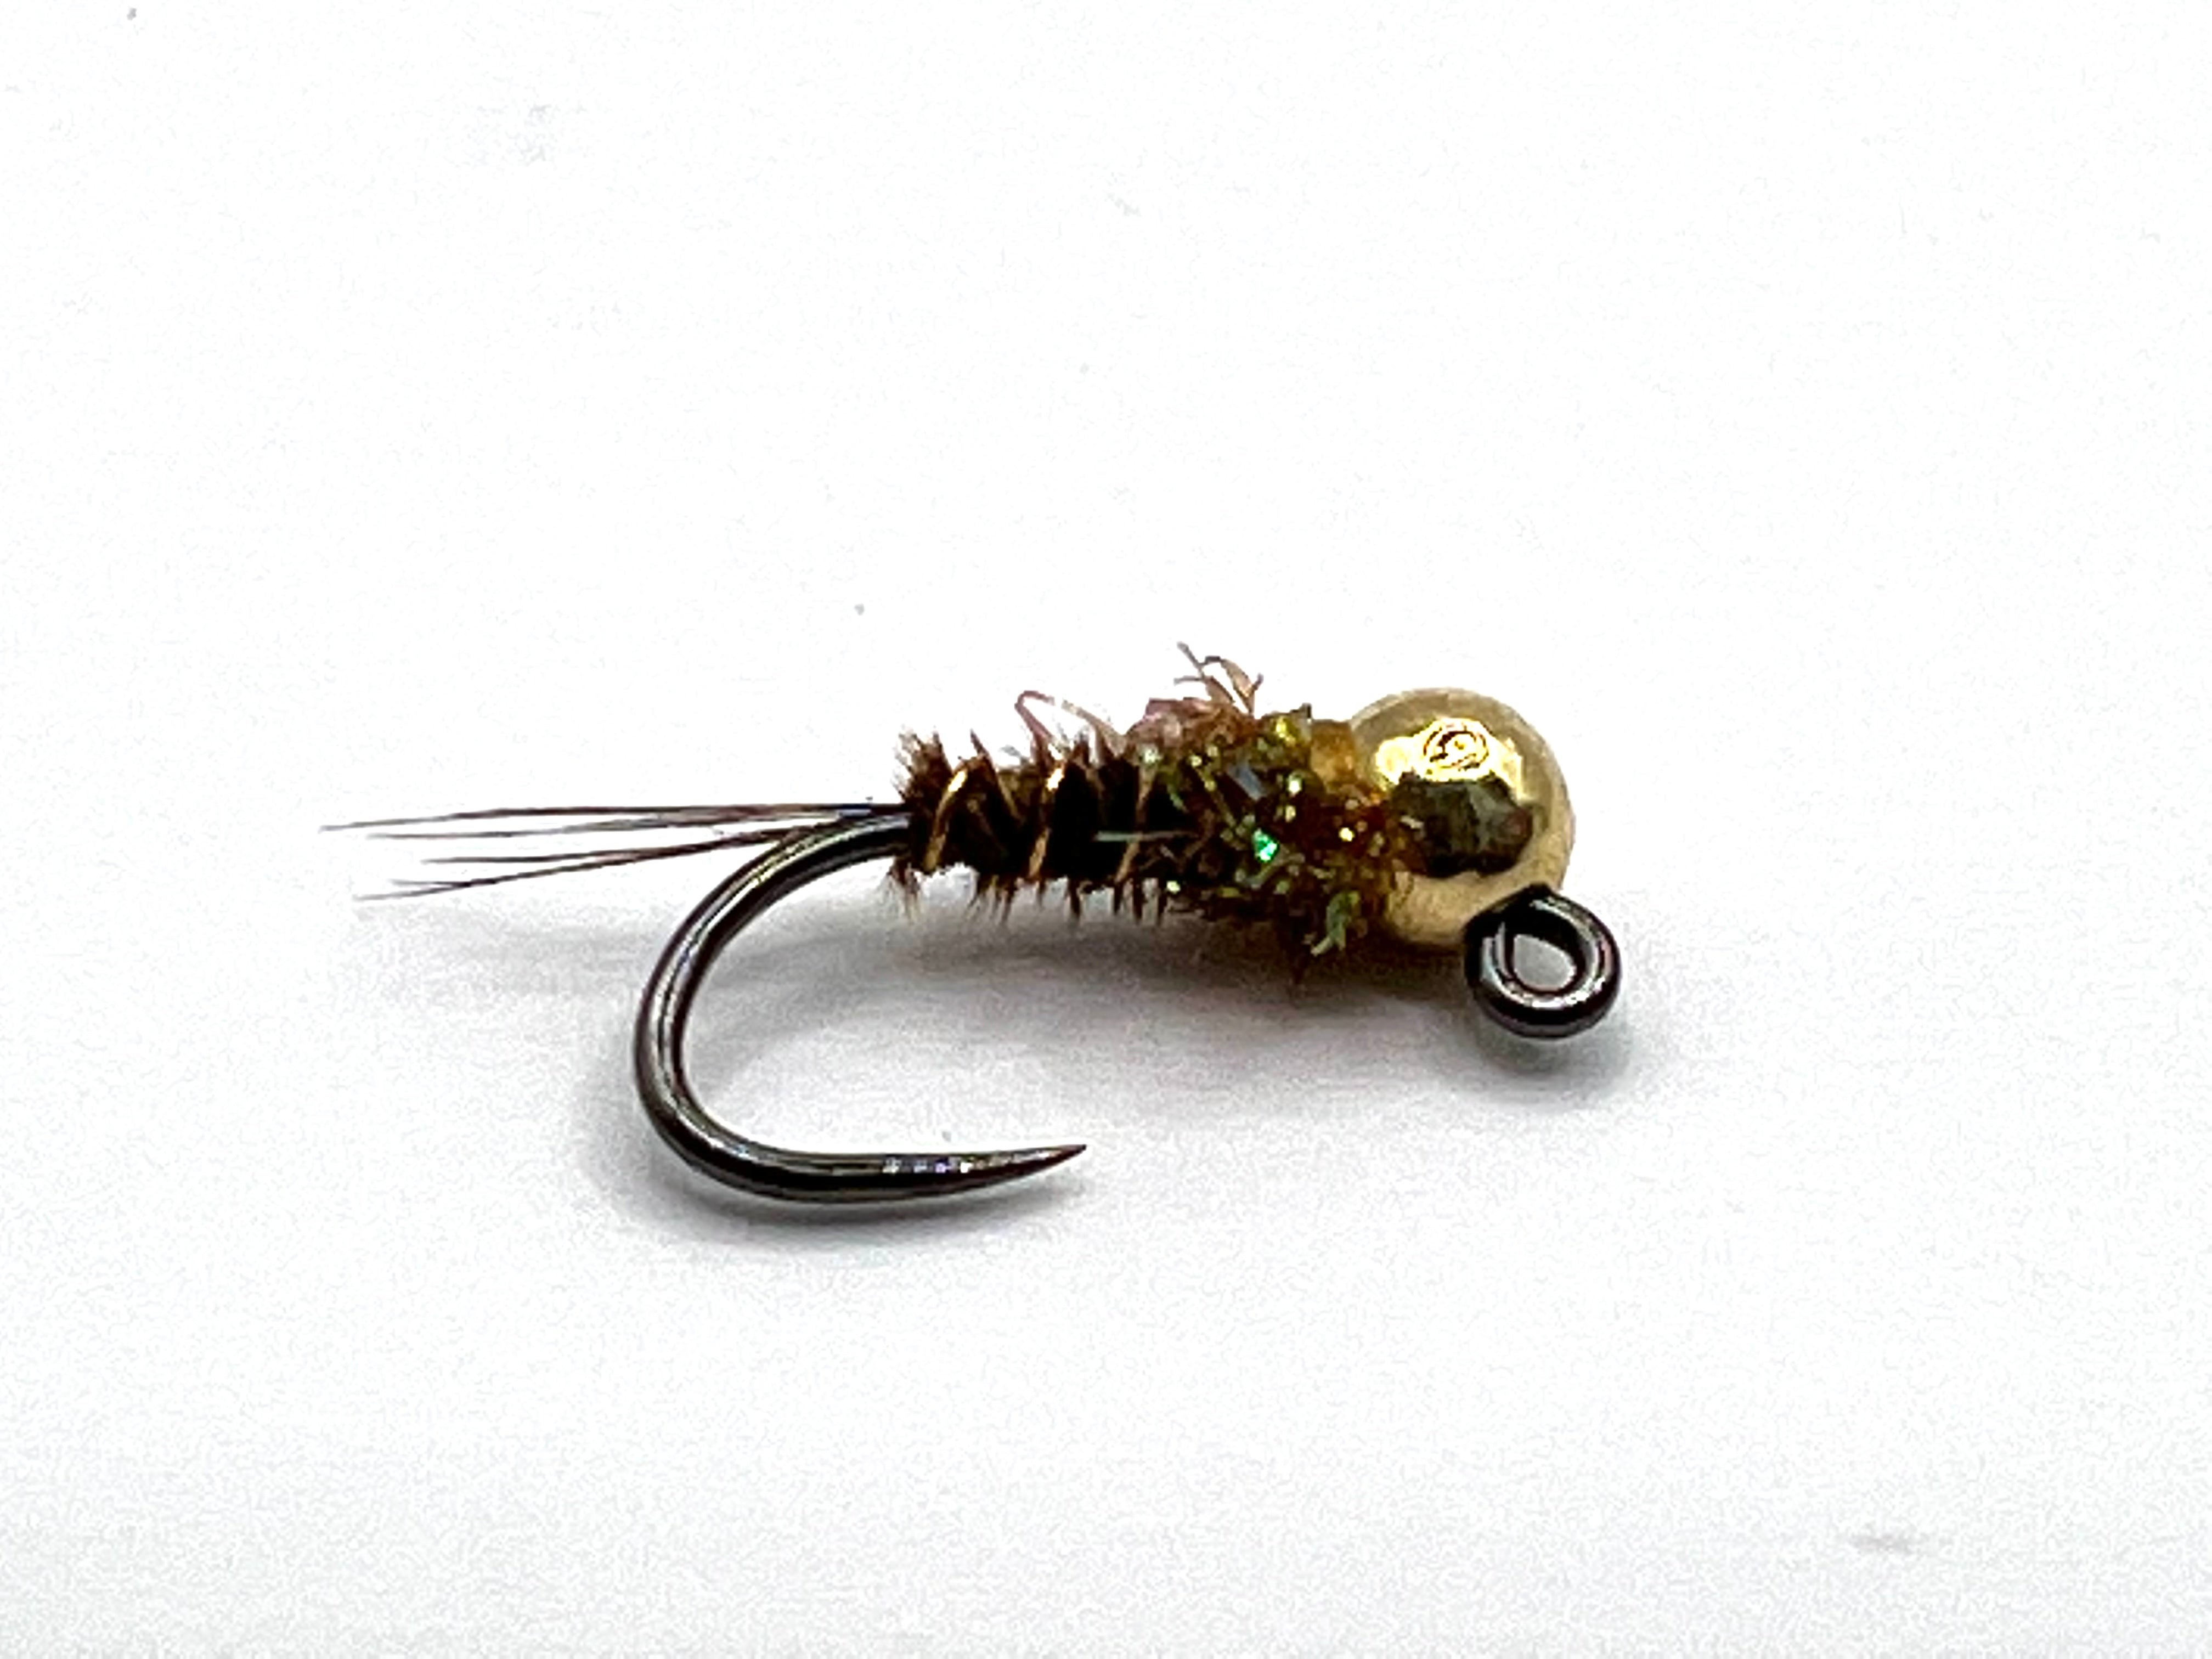 Size 18 Jigged Pheasant Tail – theflydoctor